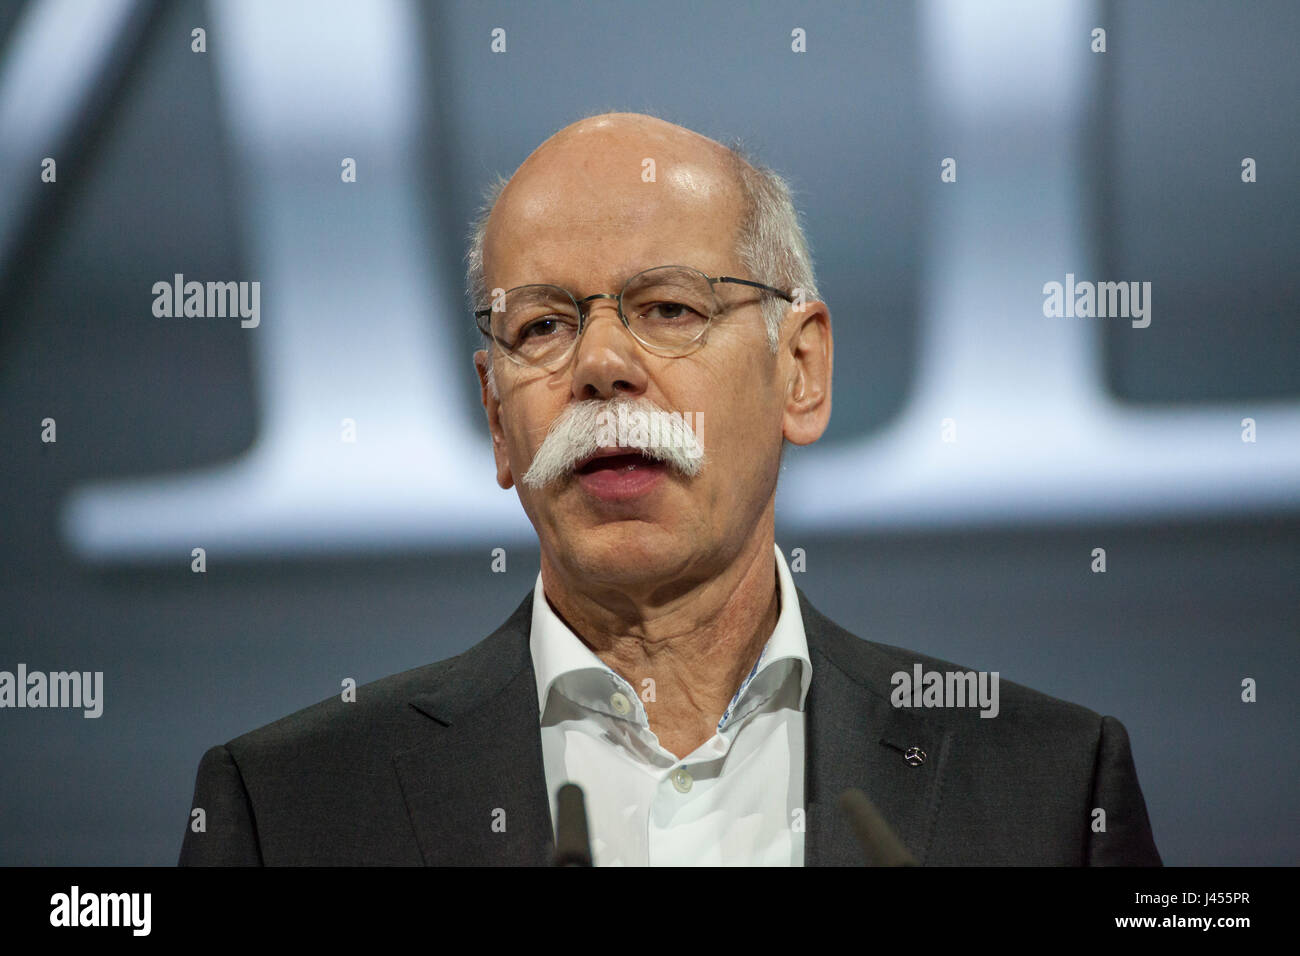 CEO Dieter Zetsche at the annual general meeting of Daimler in Berlin Stock Photo